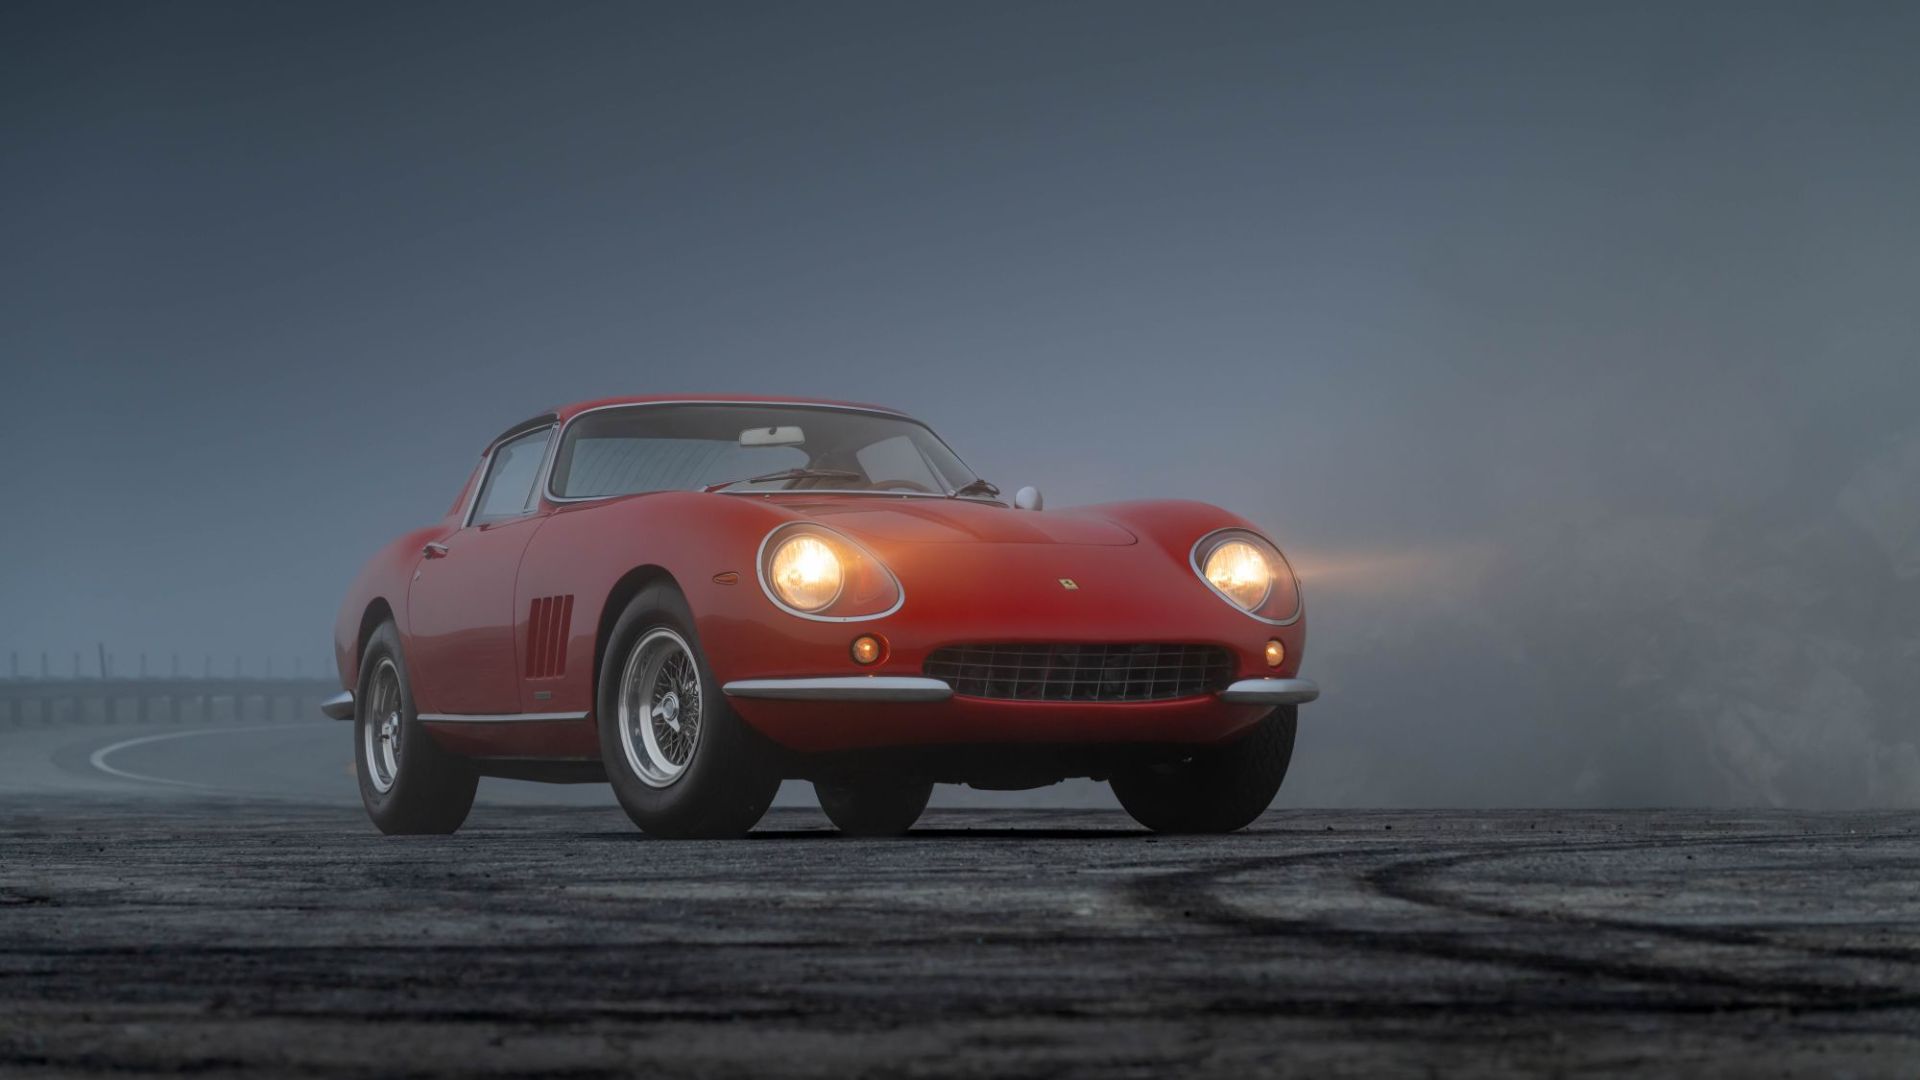 1967 Ferrari 275 GTB/4 Alloy by Scaglietti Offered at Sotheby's